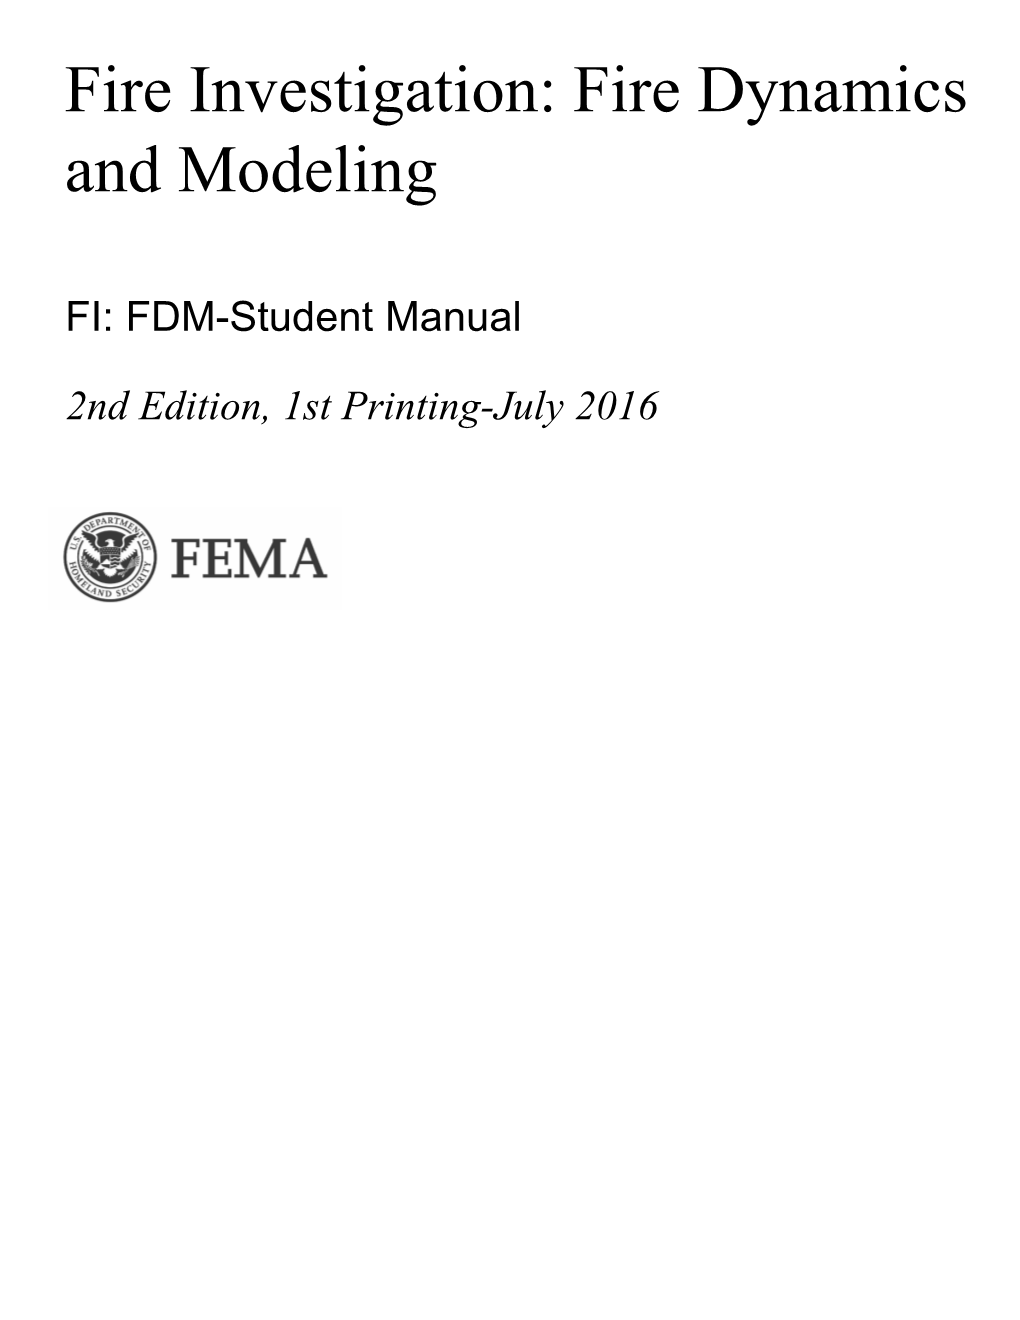 Fire Investigation: Fire Dynamics and Modeling-Student Manual